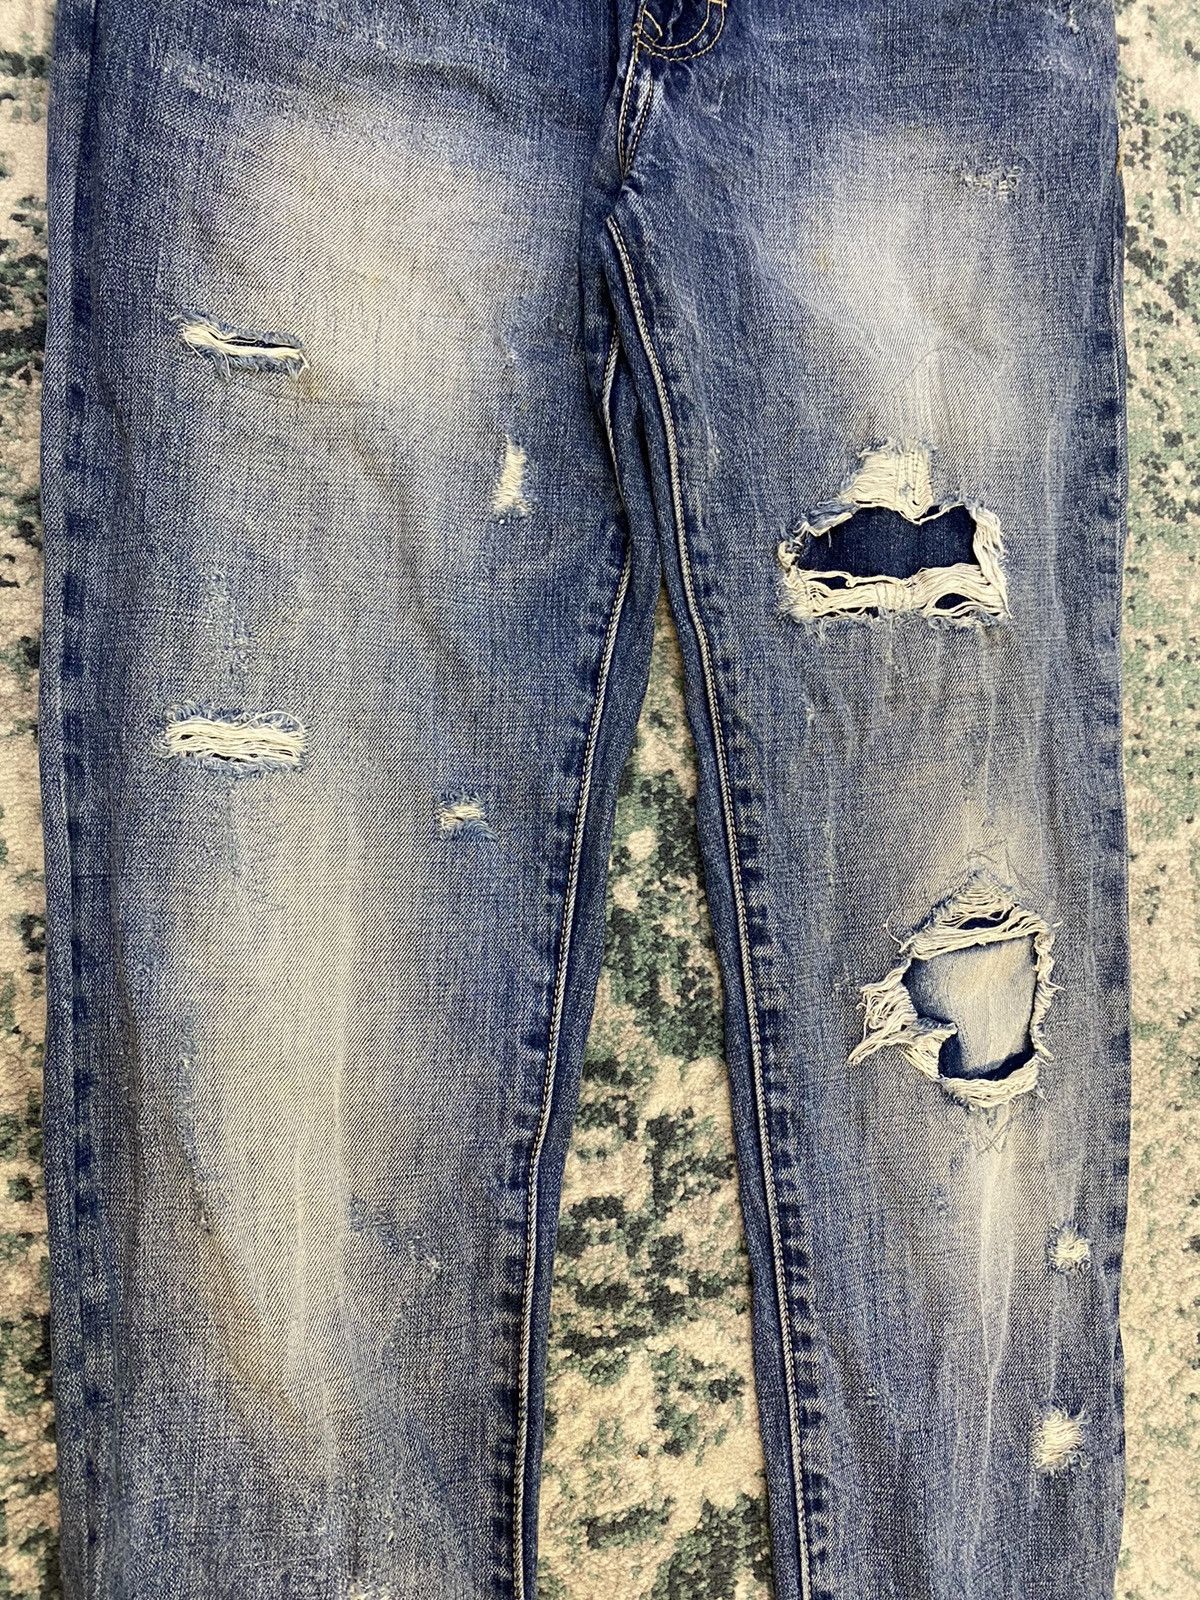 Dsquared2 Made in Italy Denim Distressed Jeans - 4